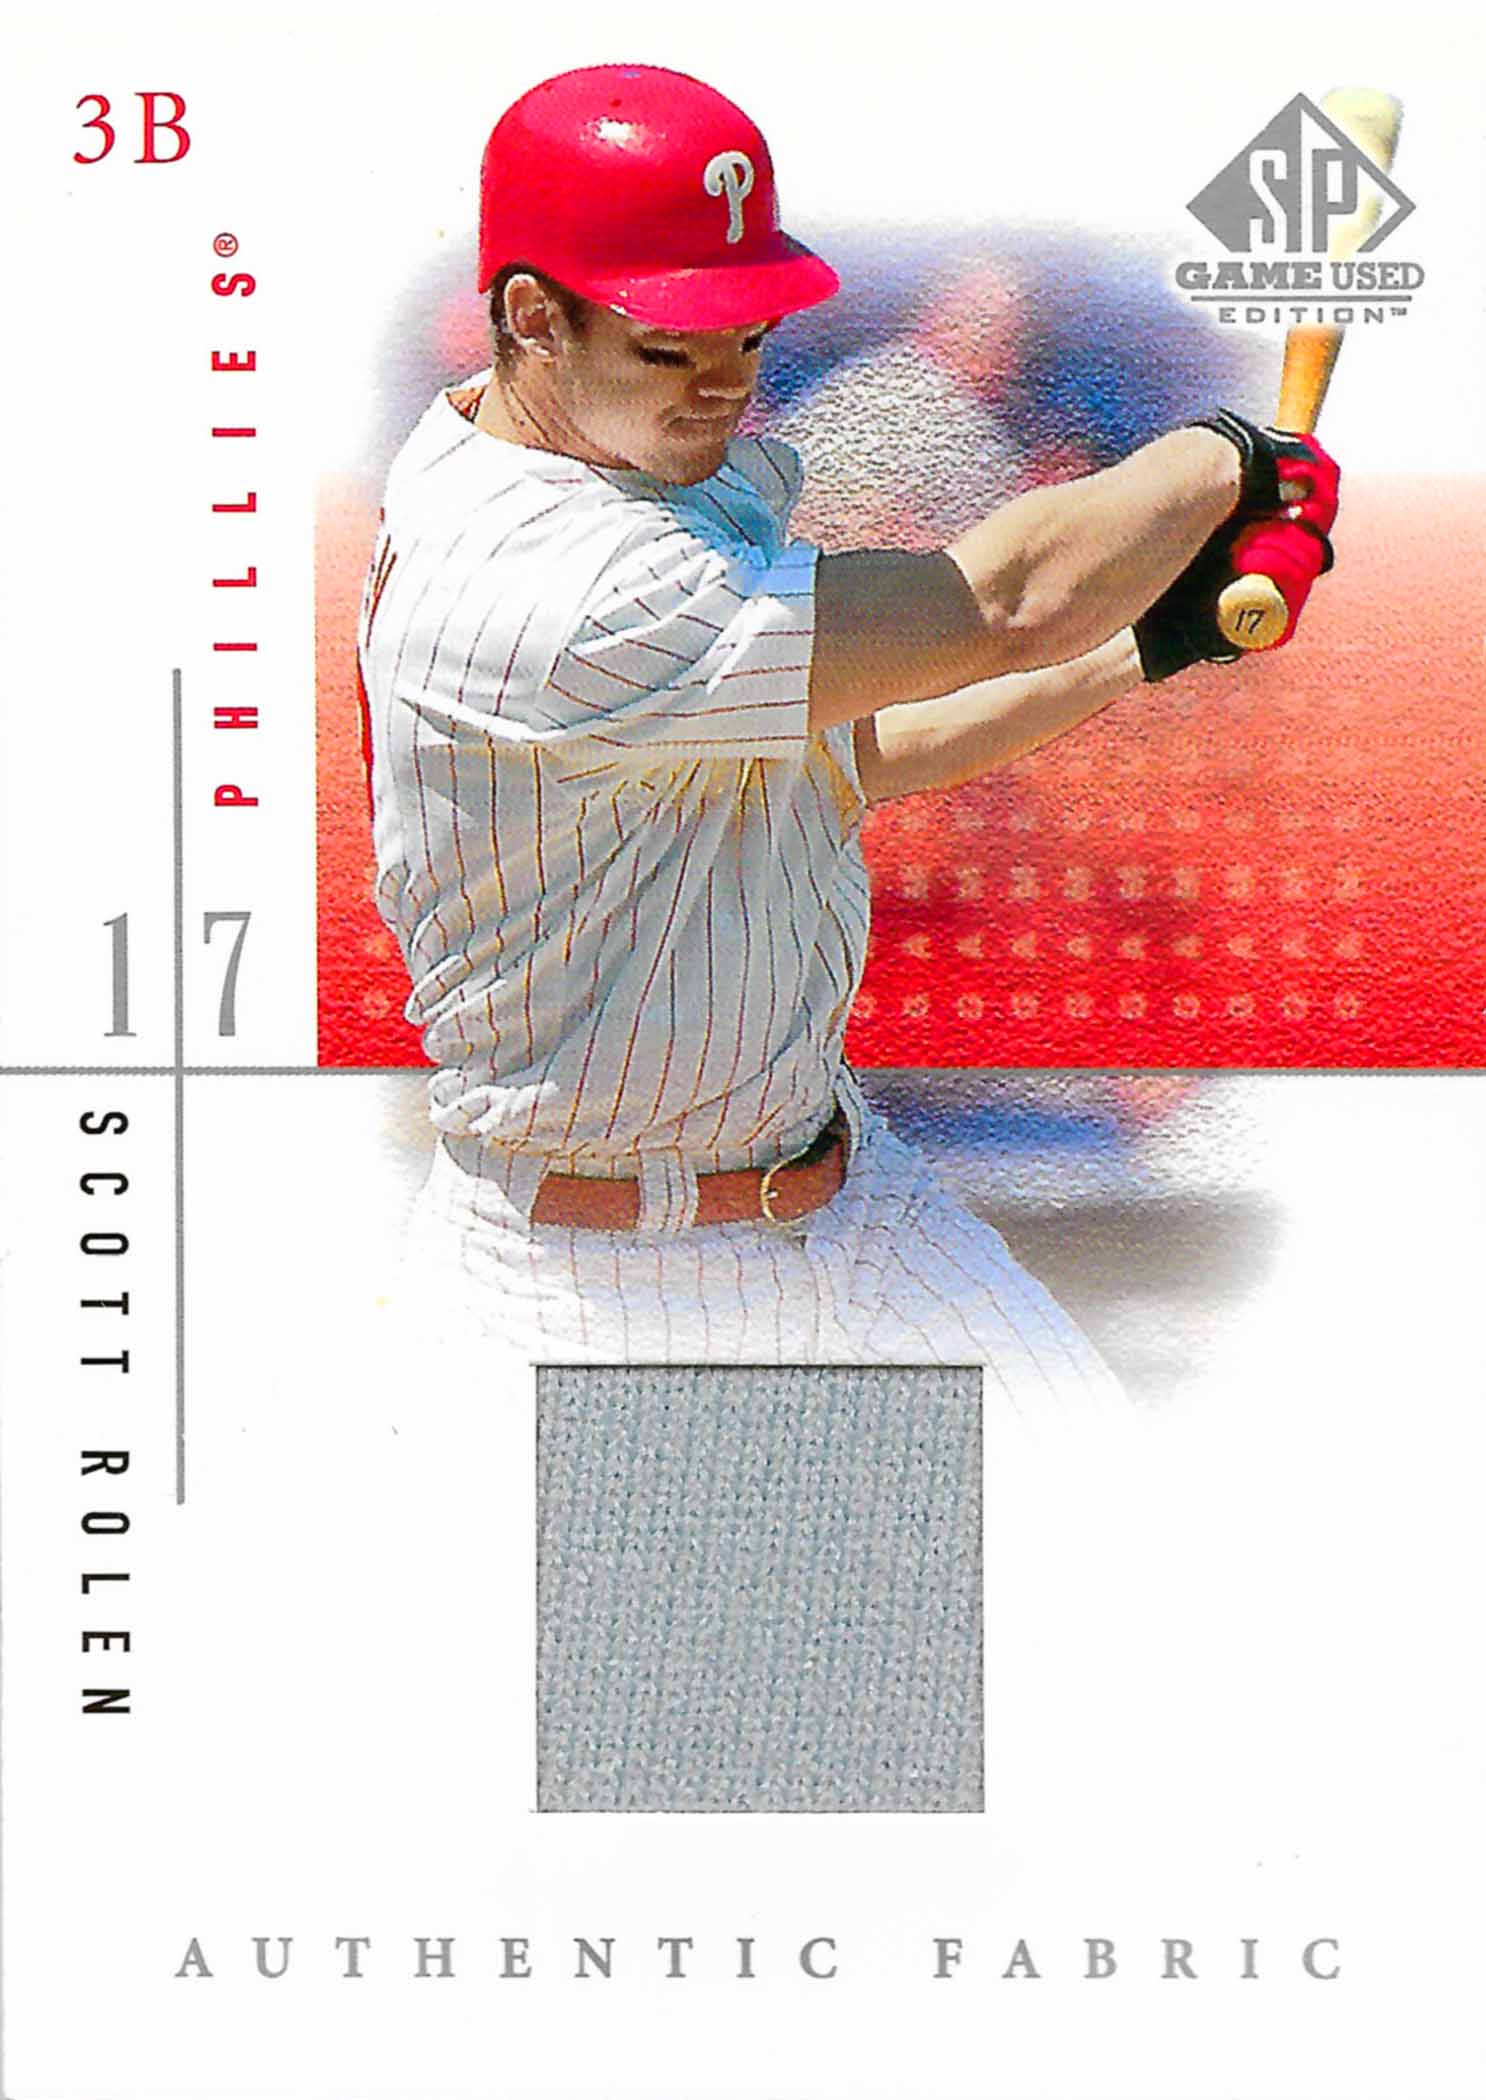 2011 Topps Diamond Anniversary Factory Set Limited Edition